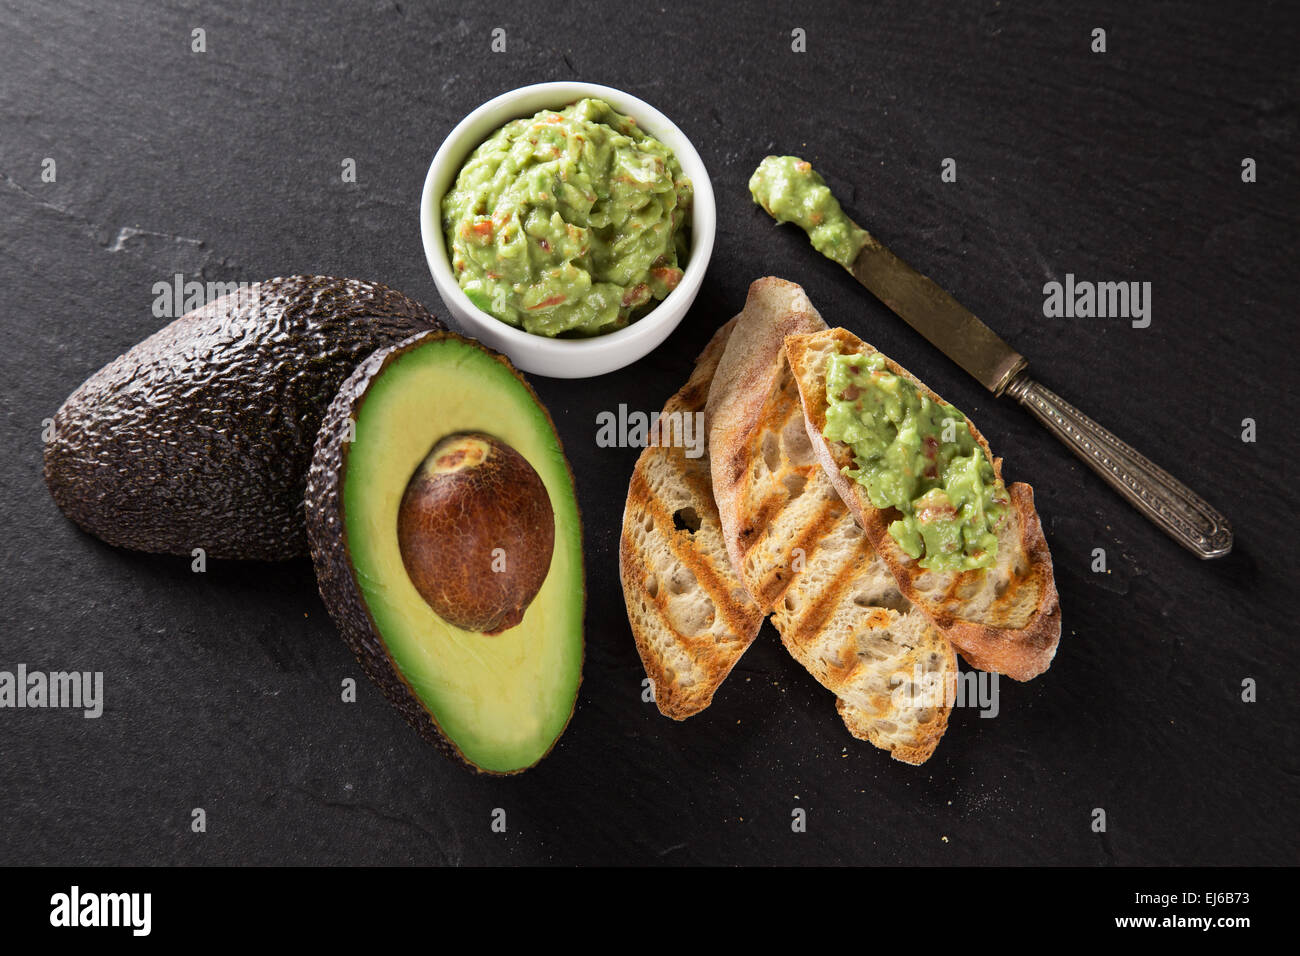 Guacamole with bread and avocado on stone background Stock Photo